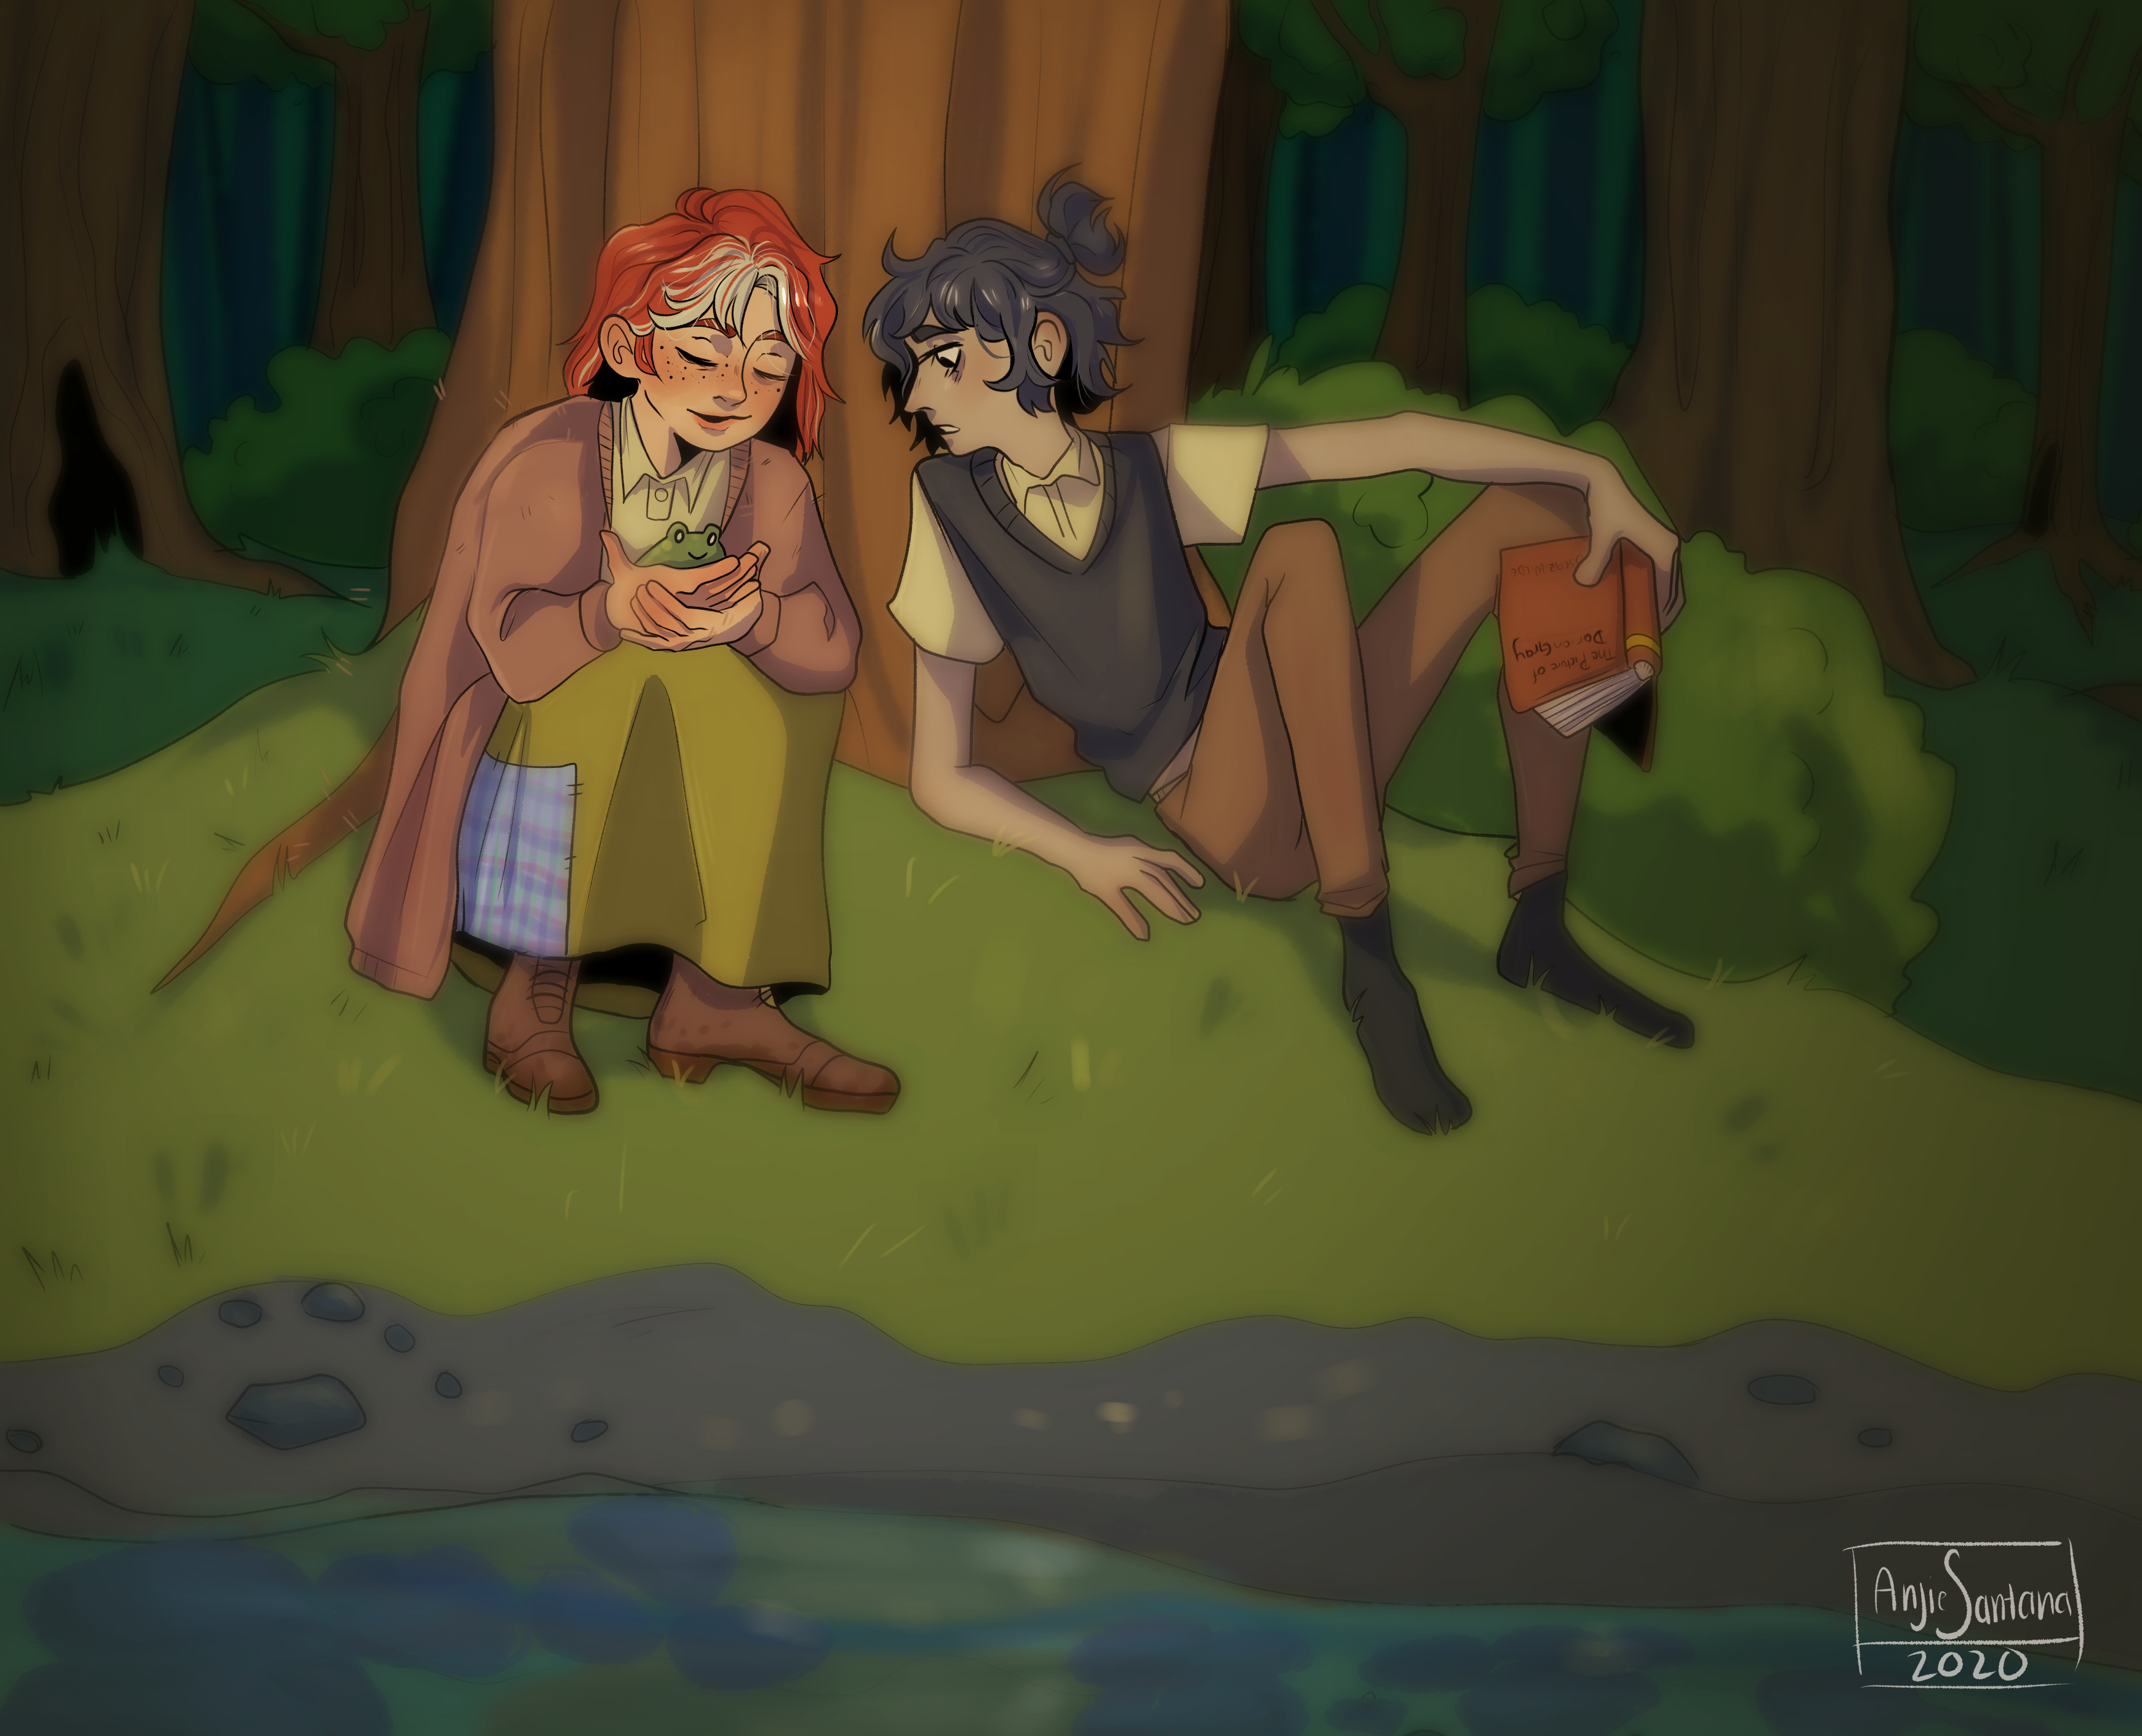 Digital illustration of two people enjoying nature, sitting in a forest at ease looking at frogs and reading books.